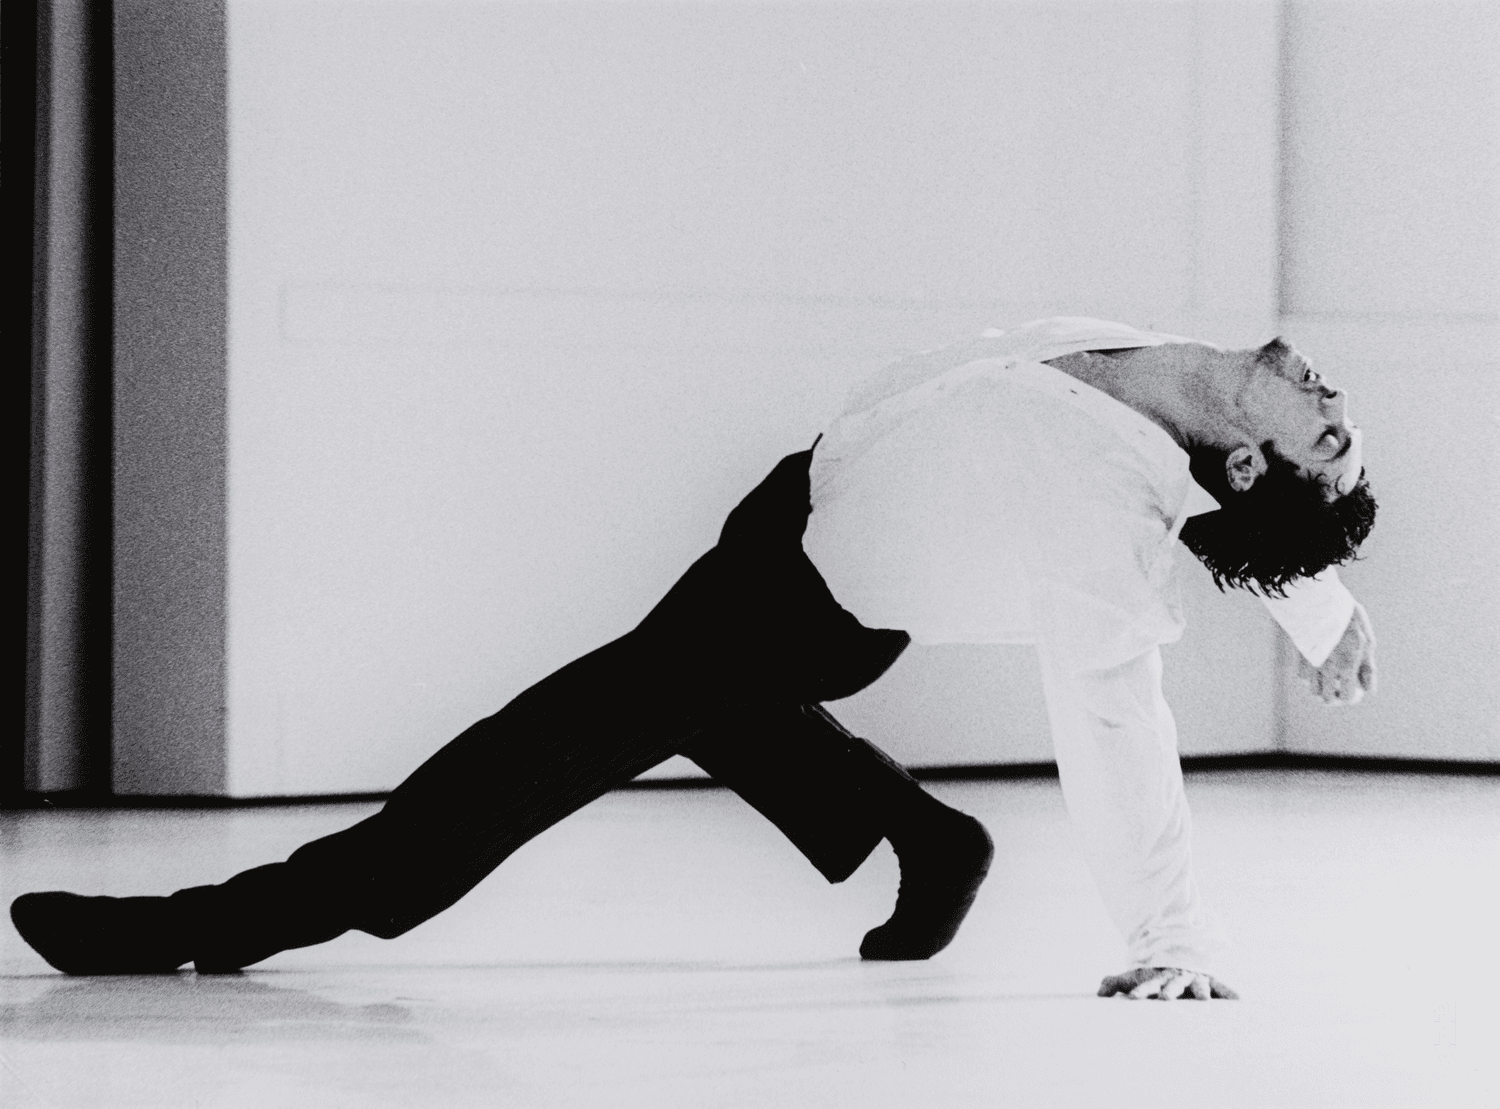 Fabien Prioville in “For the Children of Yesterday, Today and Tomorrow” by Pina Bausch